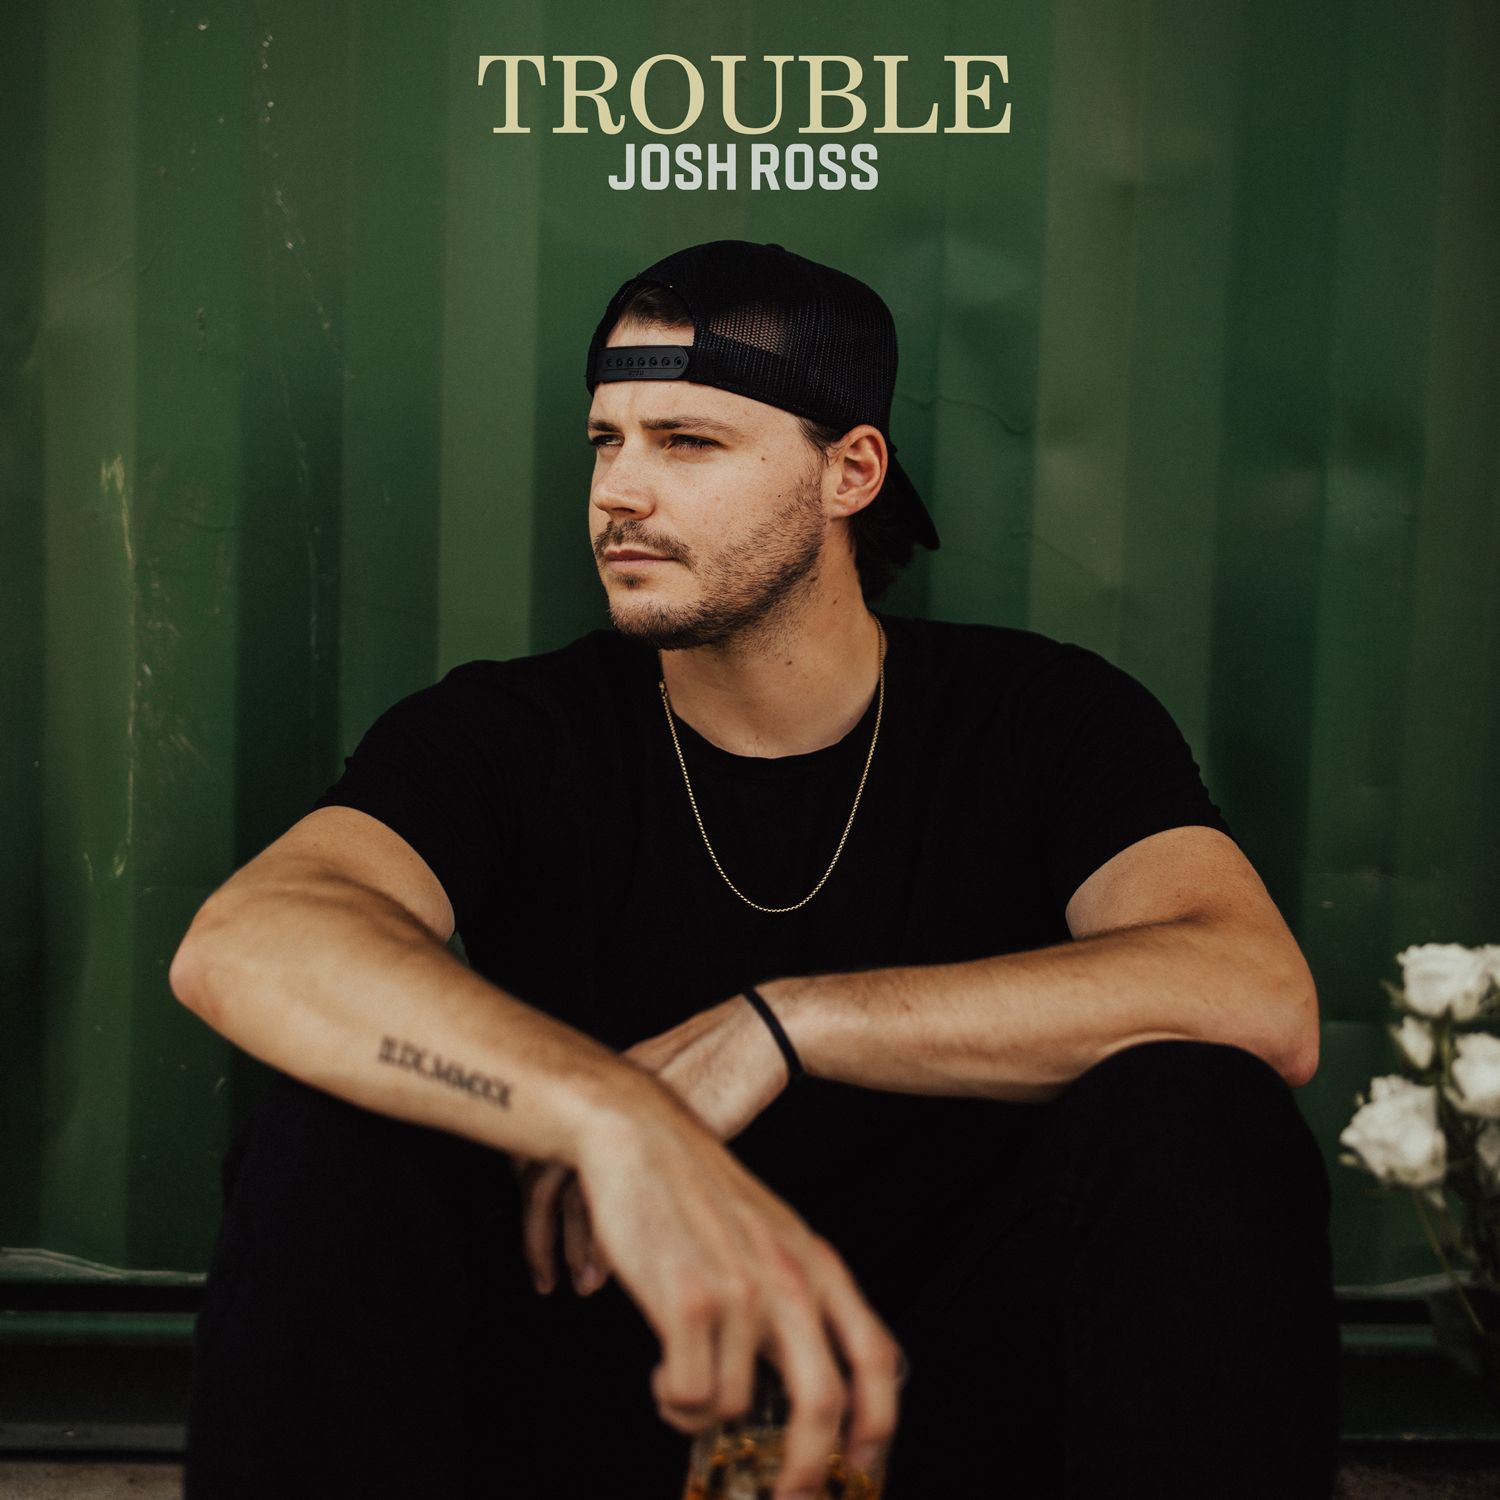 JOSH ROSS’ DEBUT U.S. SINGLE “TROUBLE” HITS COUNTRY RADIO TODAY (6/12)